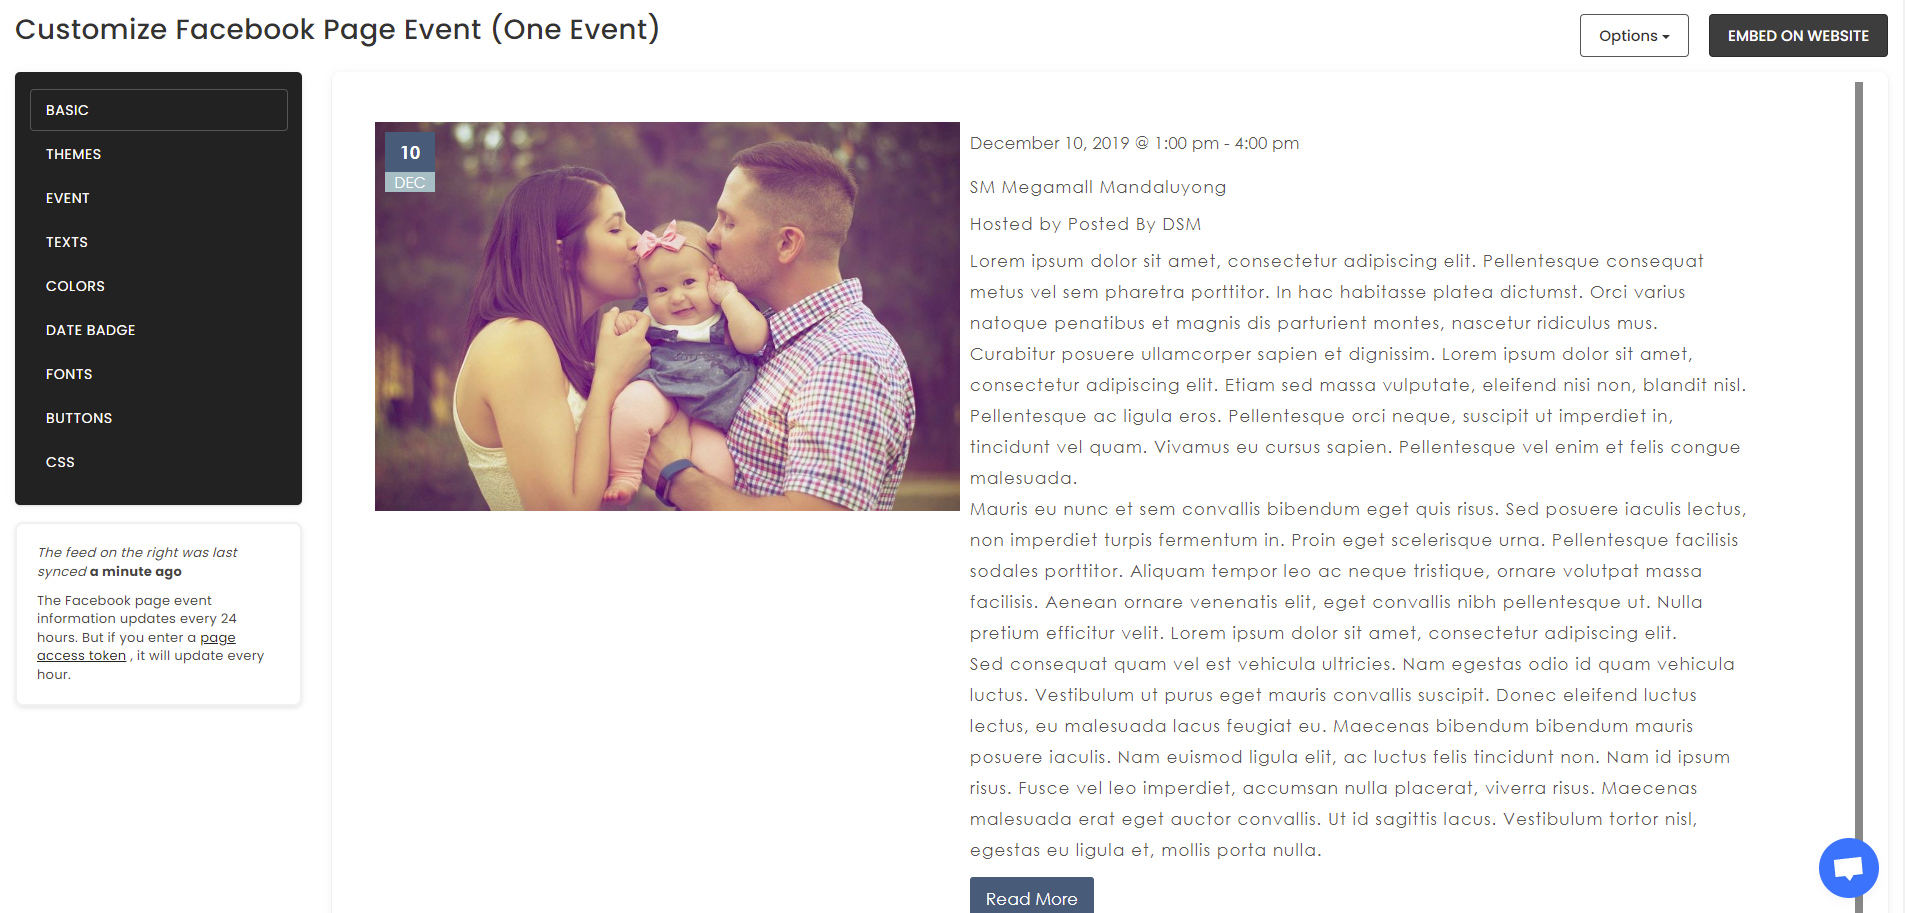 Customize your feed - How To Embed Facebook Page Event (One Event) On Webflow Website For Free?